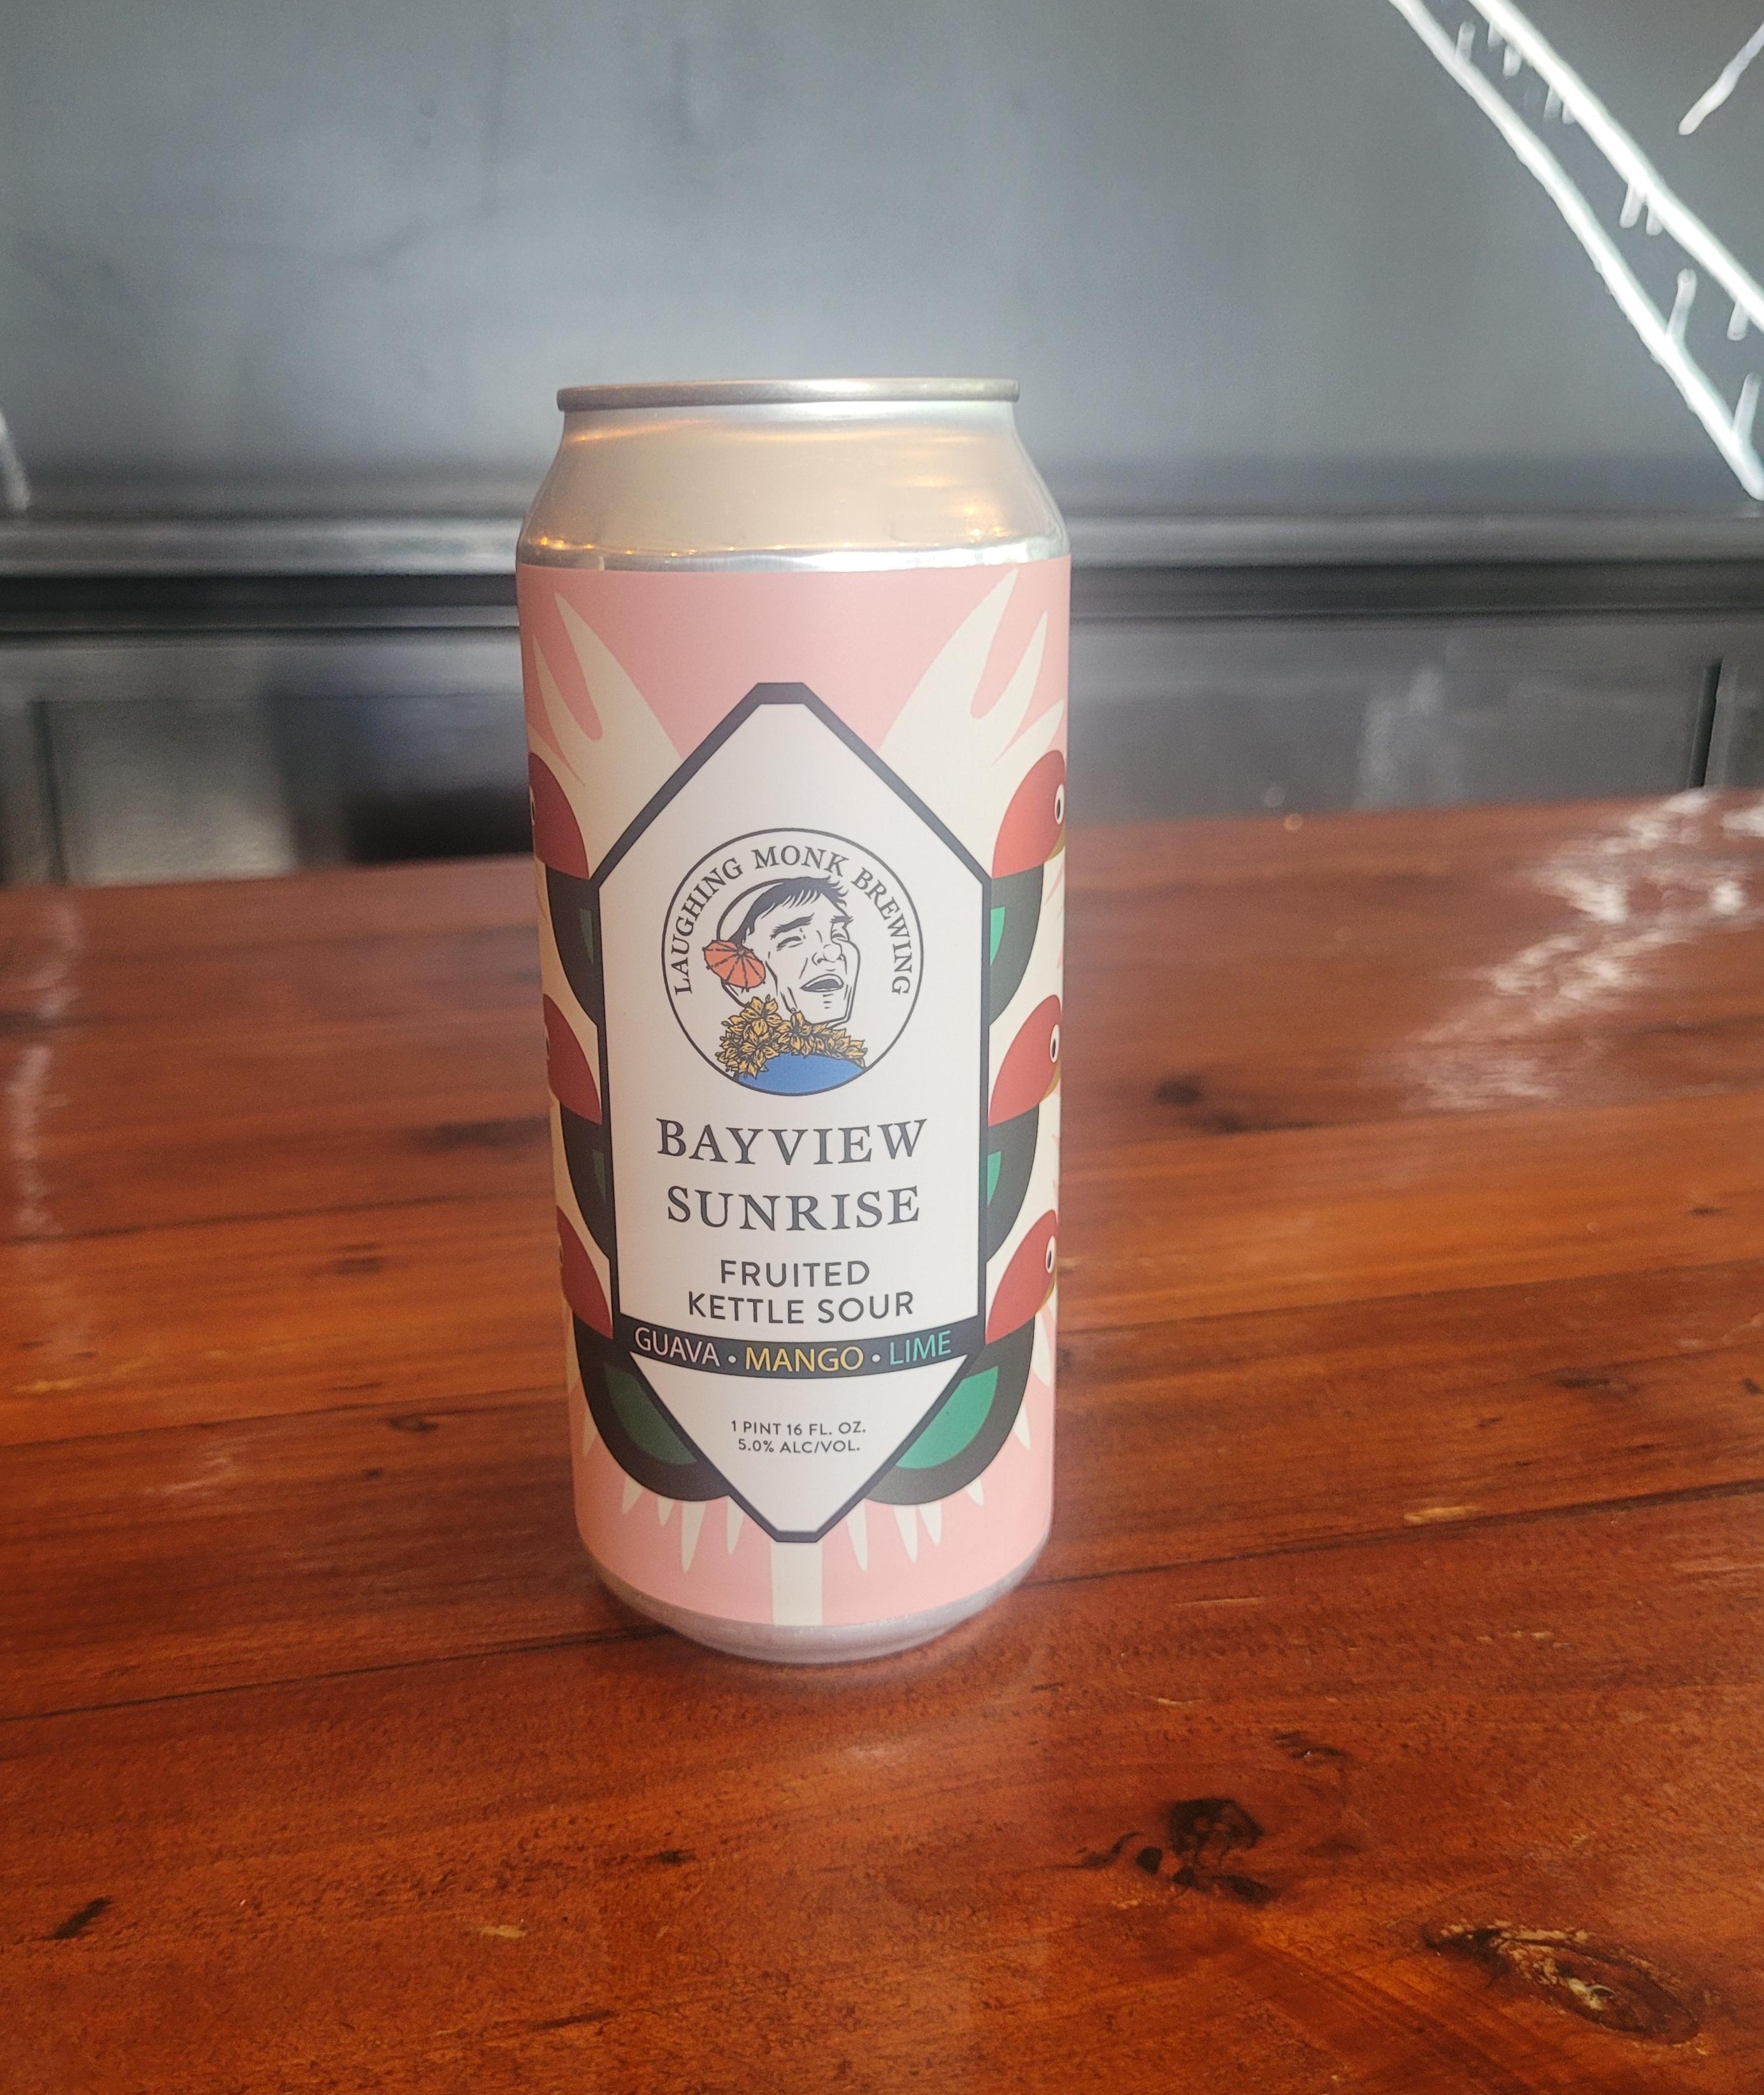 Laughing Monk - Bayview Sunrise Kettle Sour